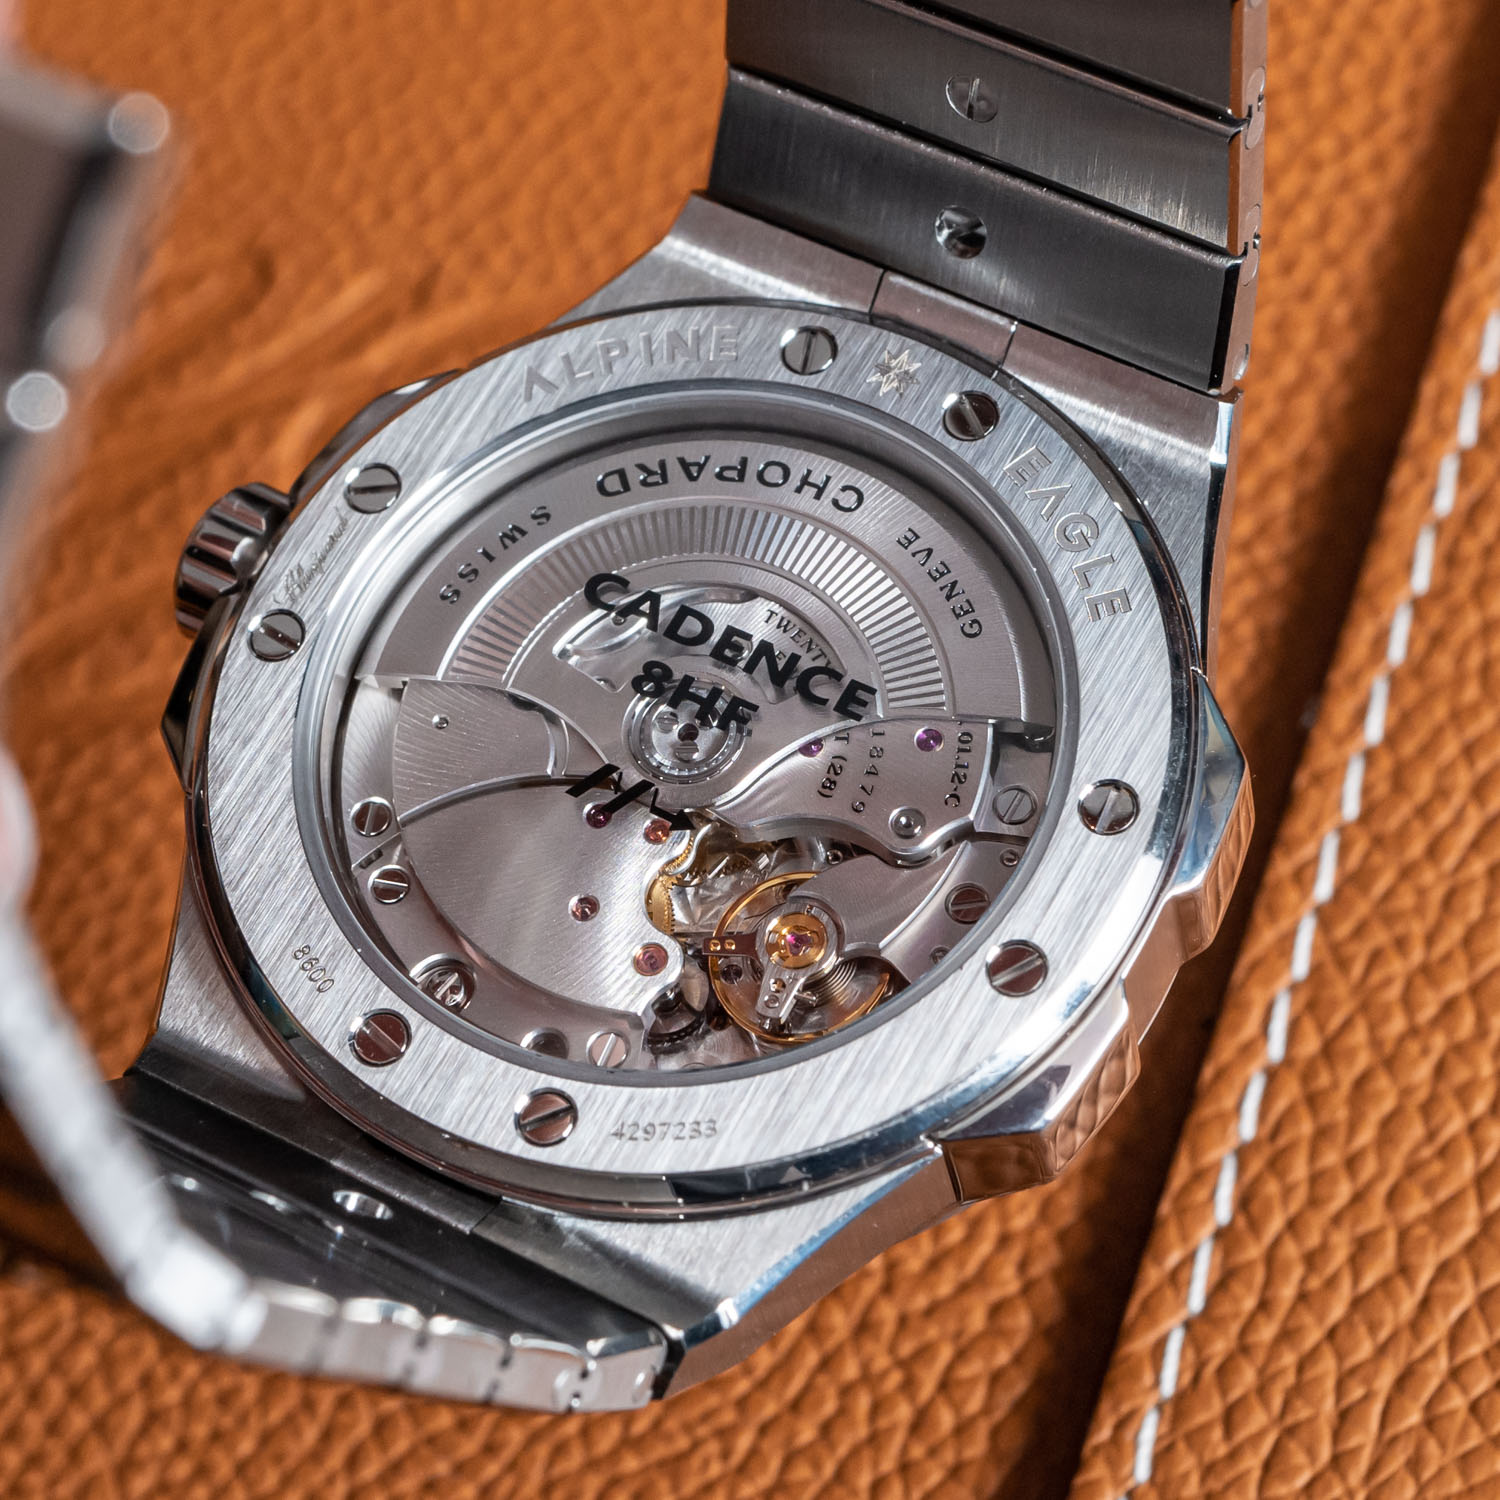 Review: the new Chopard Alpine Eagle Cadence 8HF in titanium 